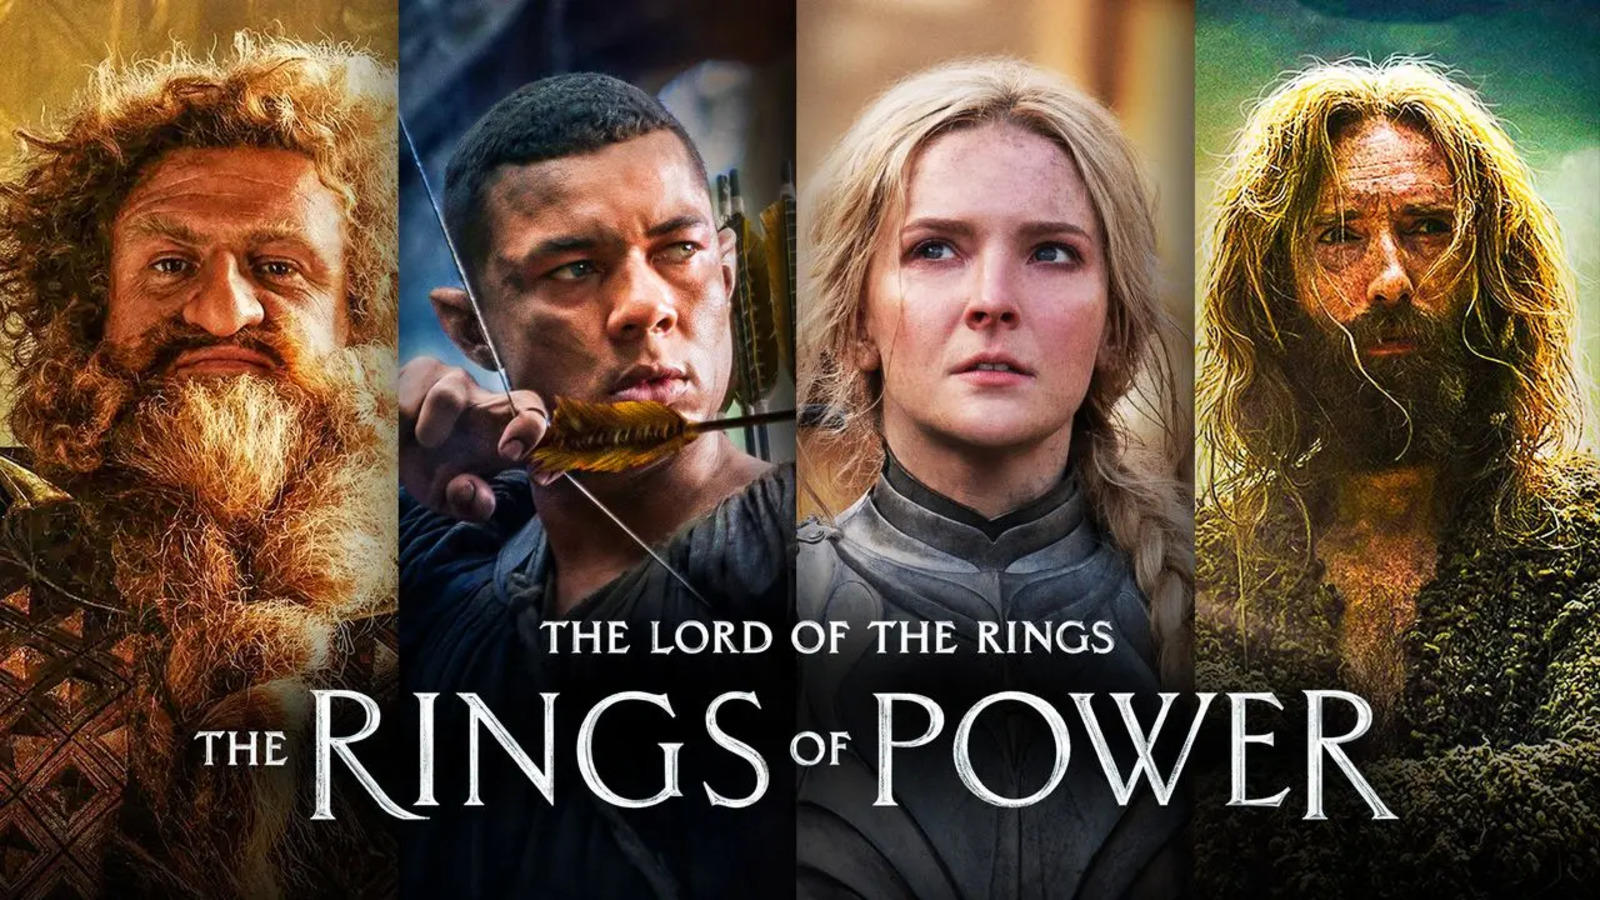 Rise of Sauron: The Lord of the Rings: Rings of Power season two teaser trailer has been released